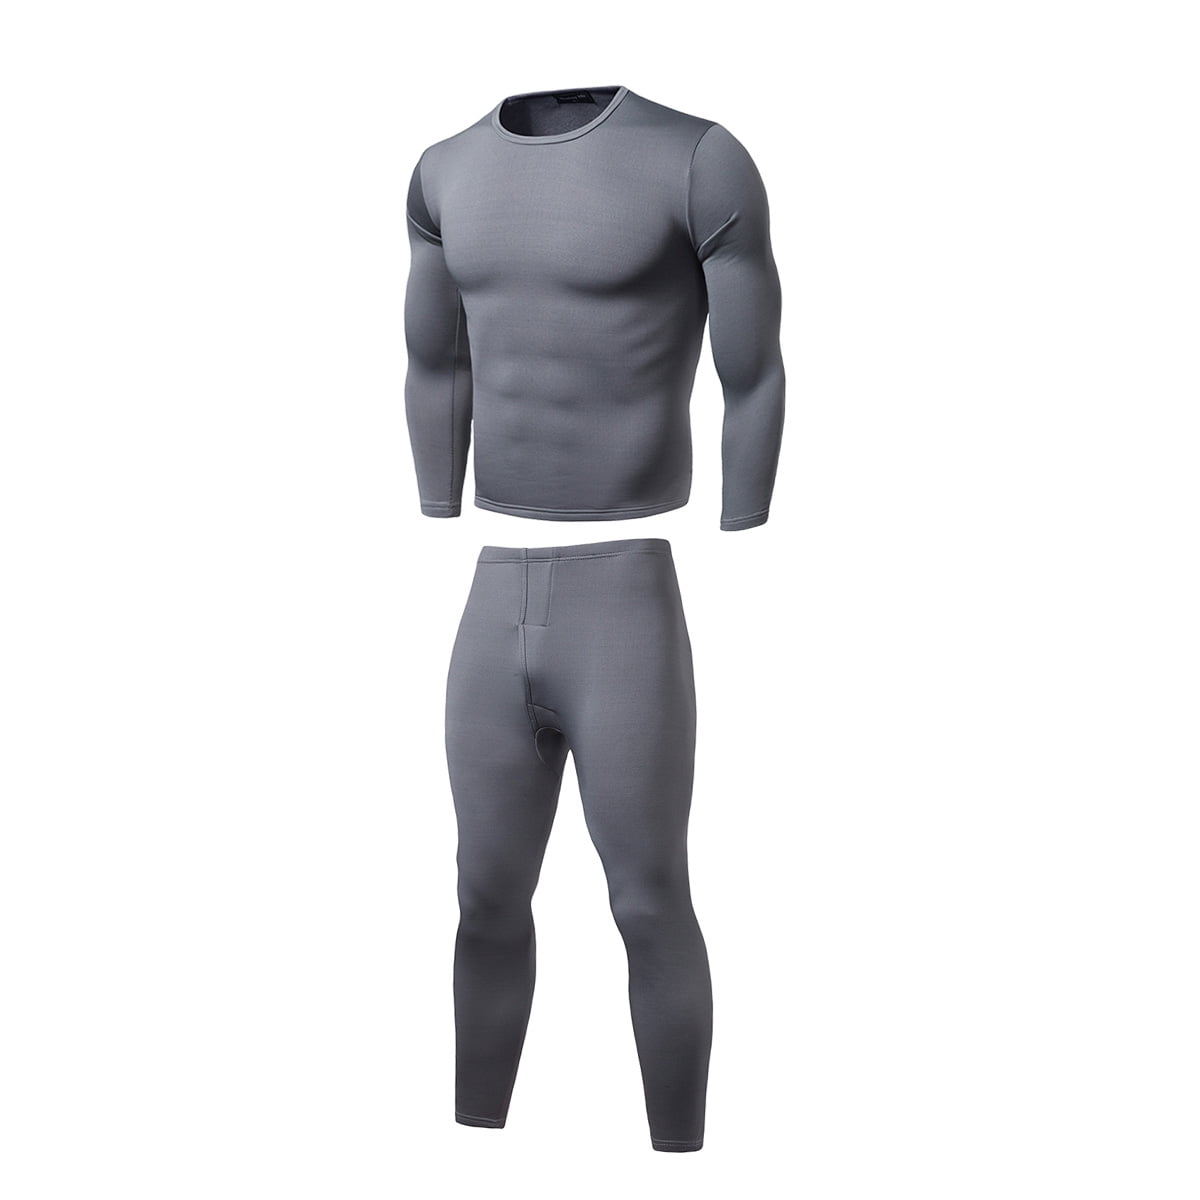 Men Thermal Underwear Set Thermo Long Johns Winter Warm Quick Dry Clothing Sets 